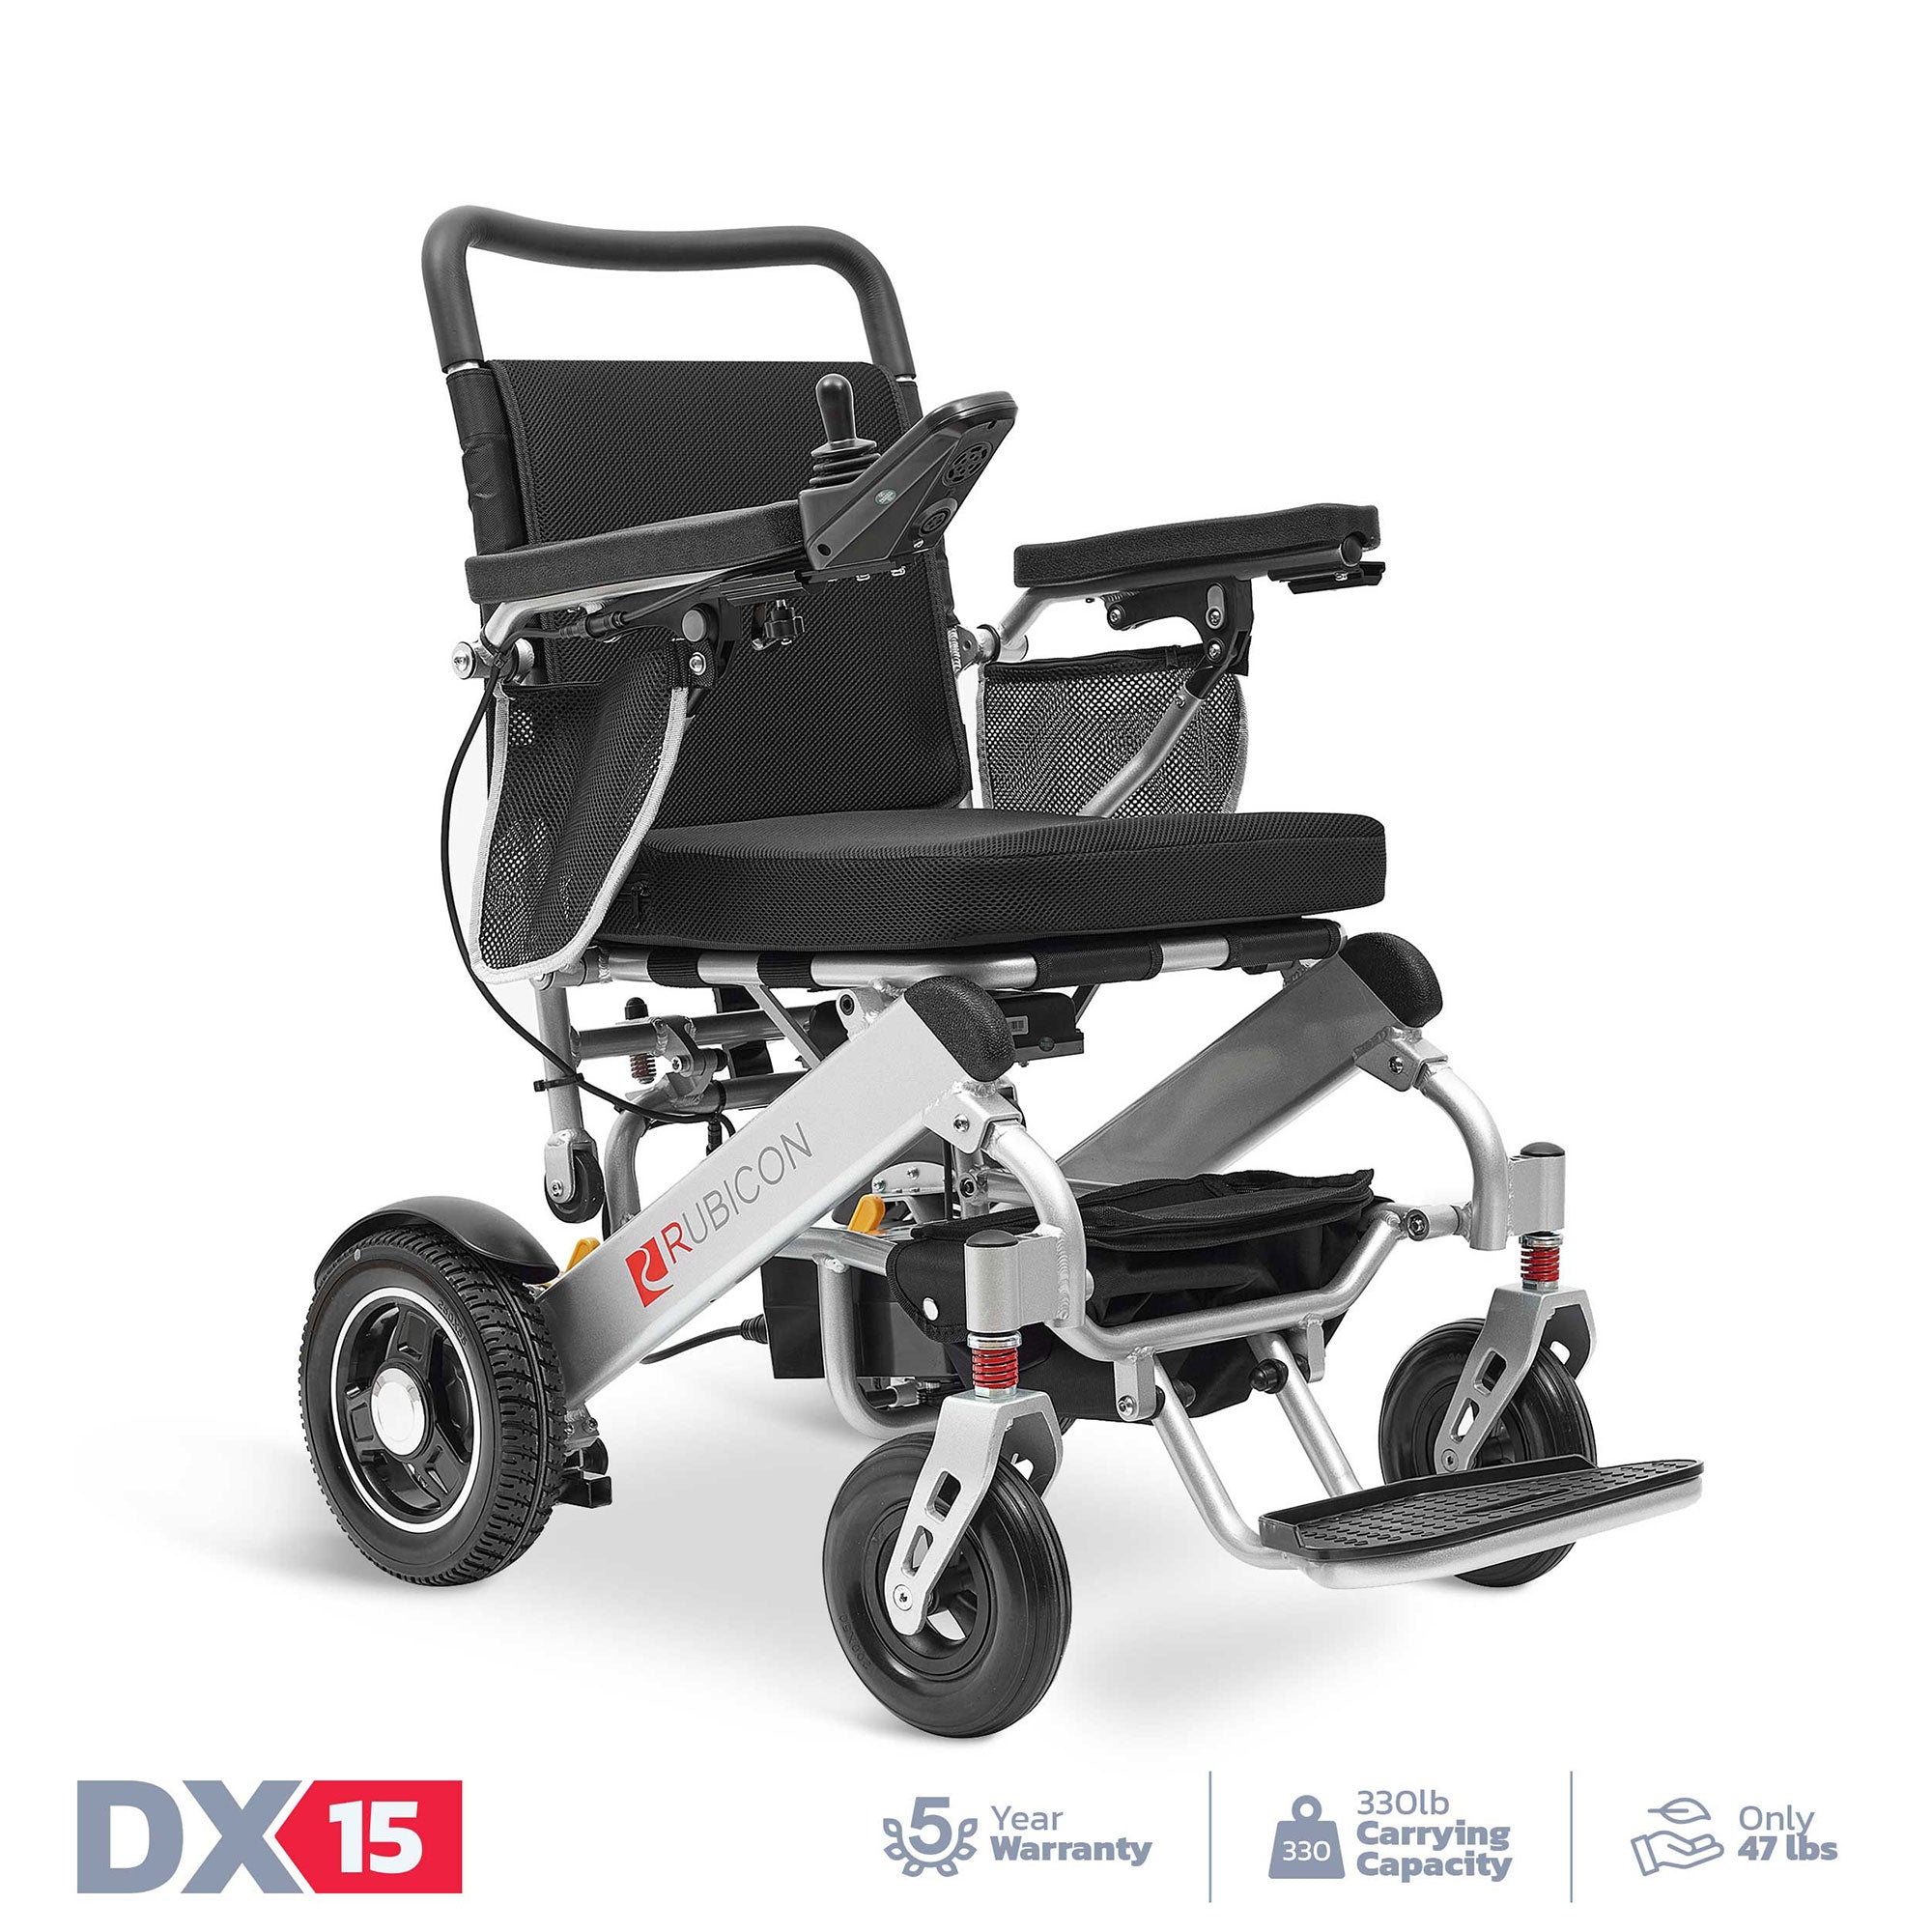 Rubicon DX15 - Lightweight and Brushless Motors Luxurious Electric Wheelchair